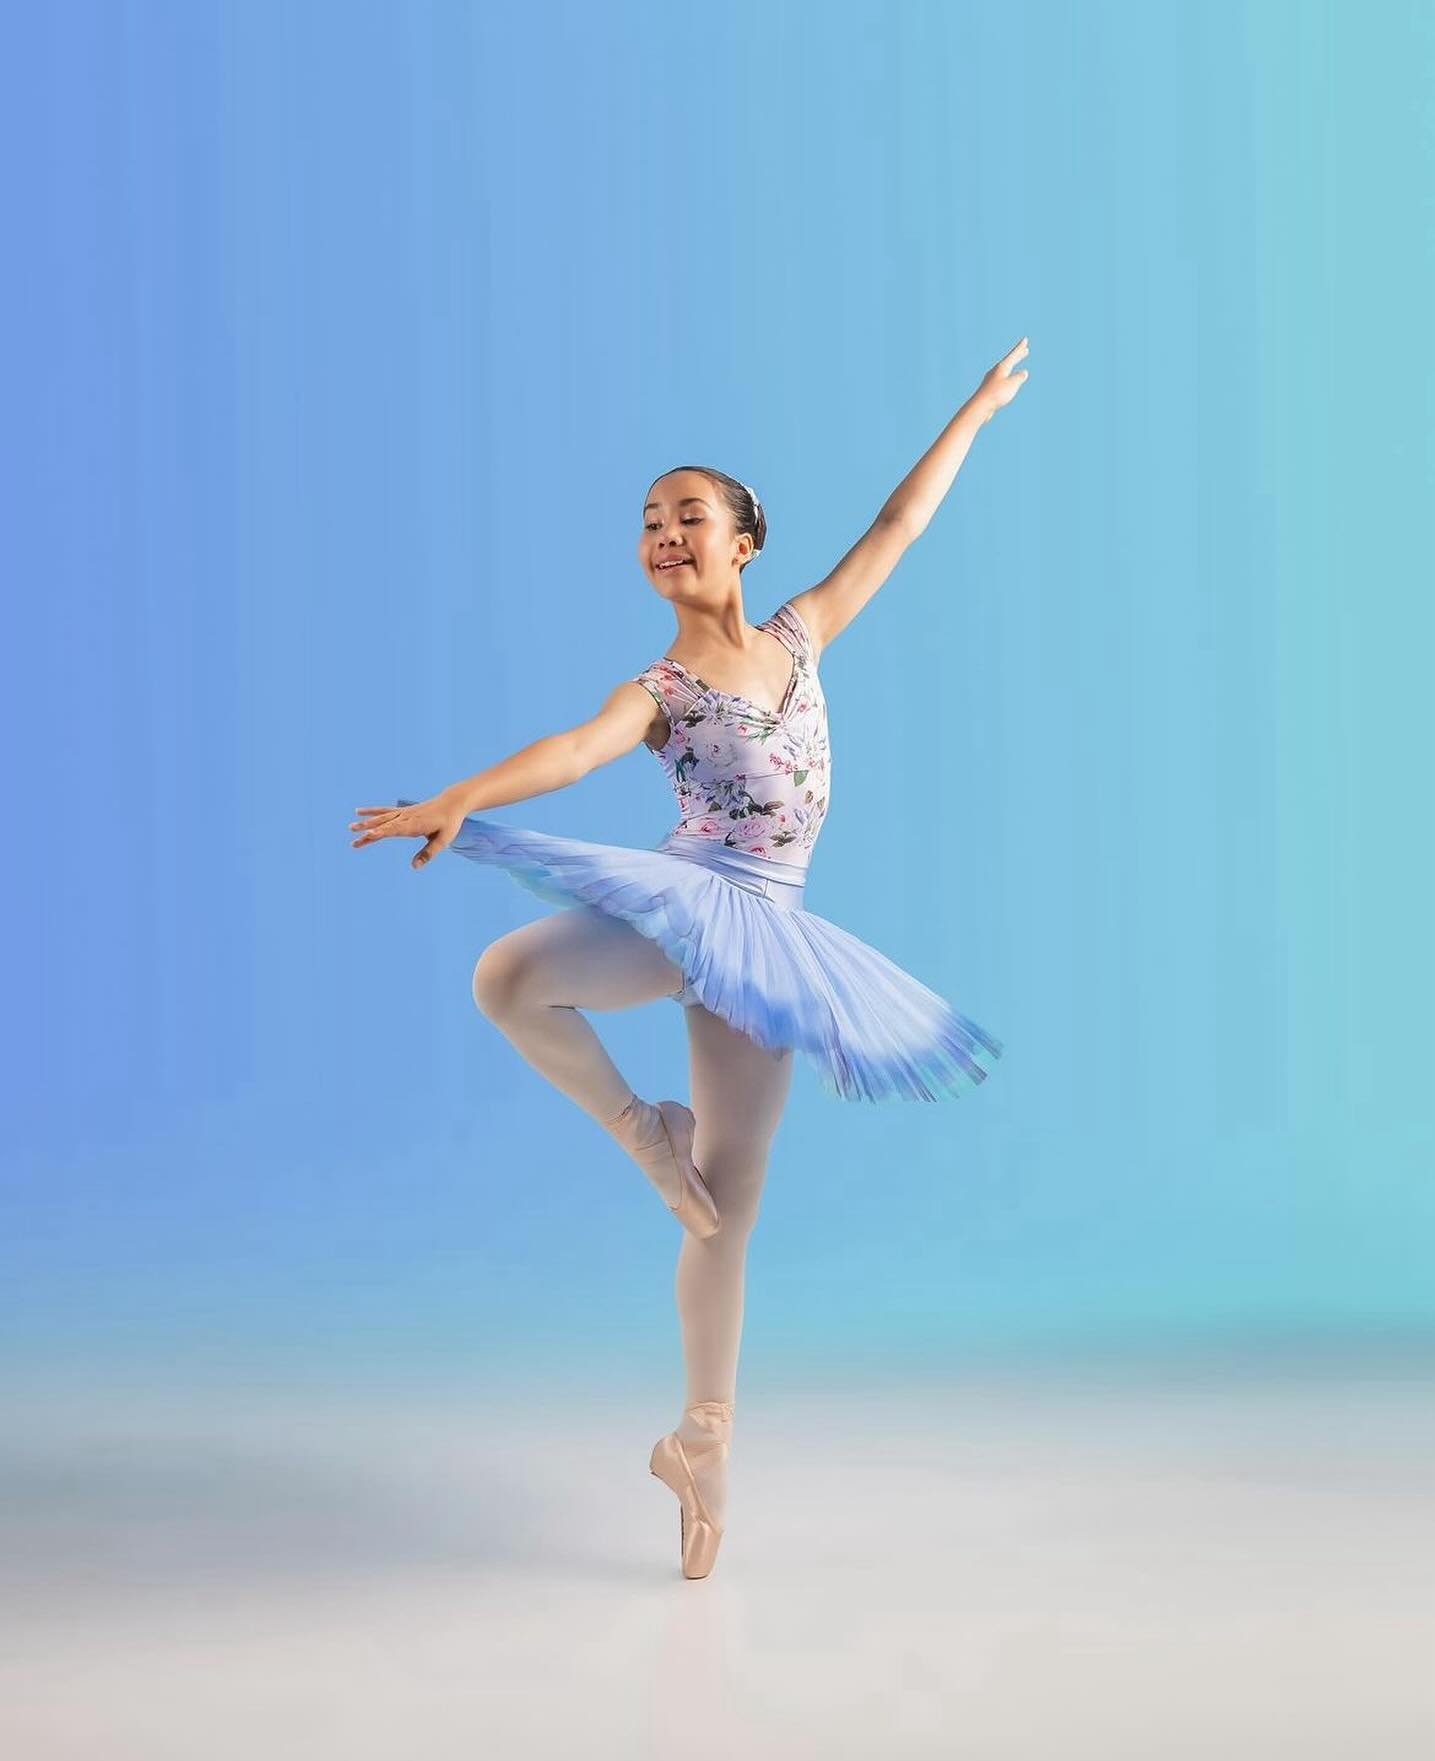 Happy Tutu Tuesday! 💕🩰

Tag us in your tutu pictures with the hashtag #bgdbtututuesday to be featured!

🩰: @missymaddiem000 
📸: @everlineimagery 

Image Description: Dancer poses in pass&eacute;. She is wearing a blue floral leotard and a blue tu